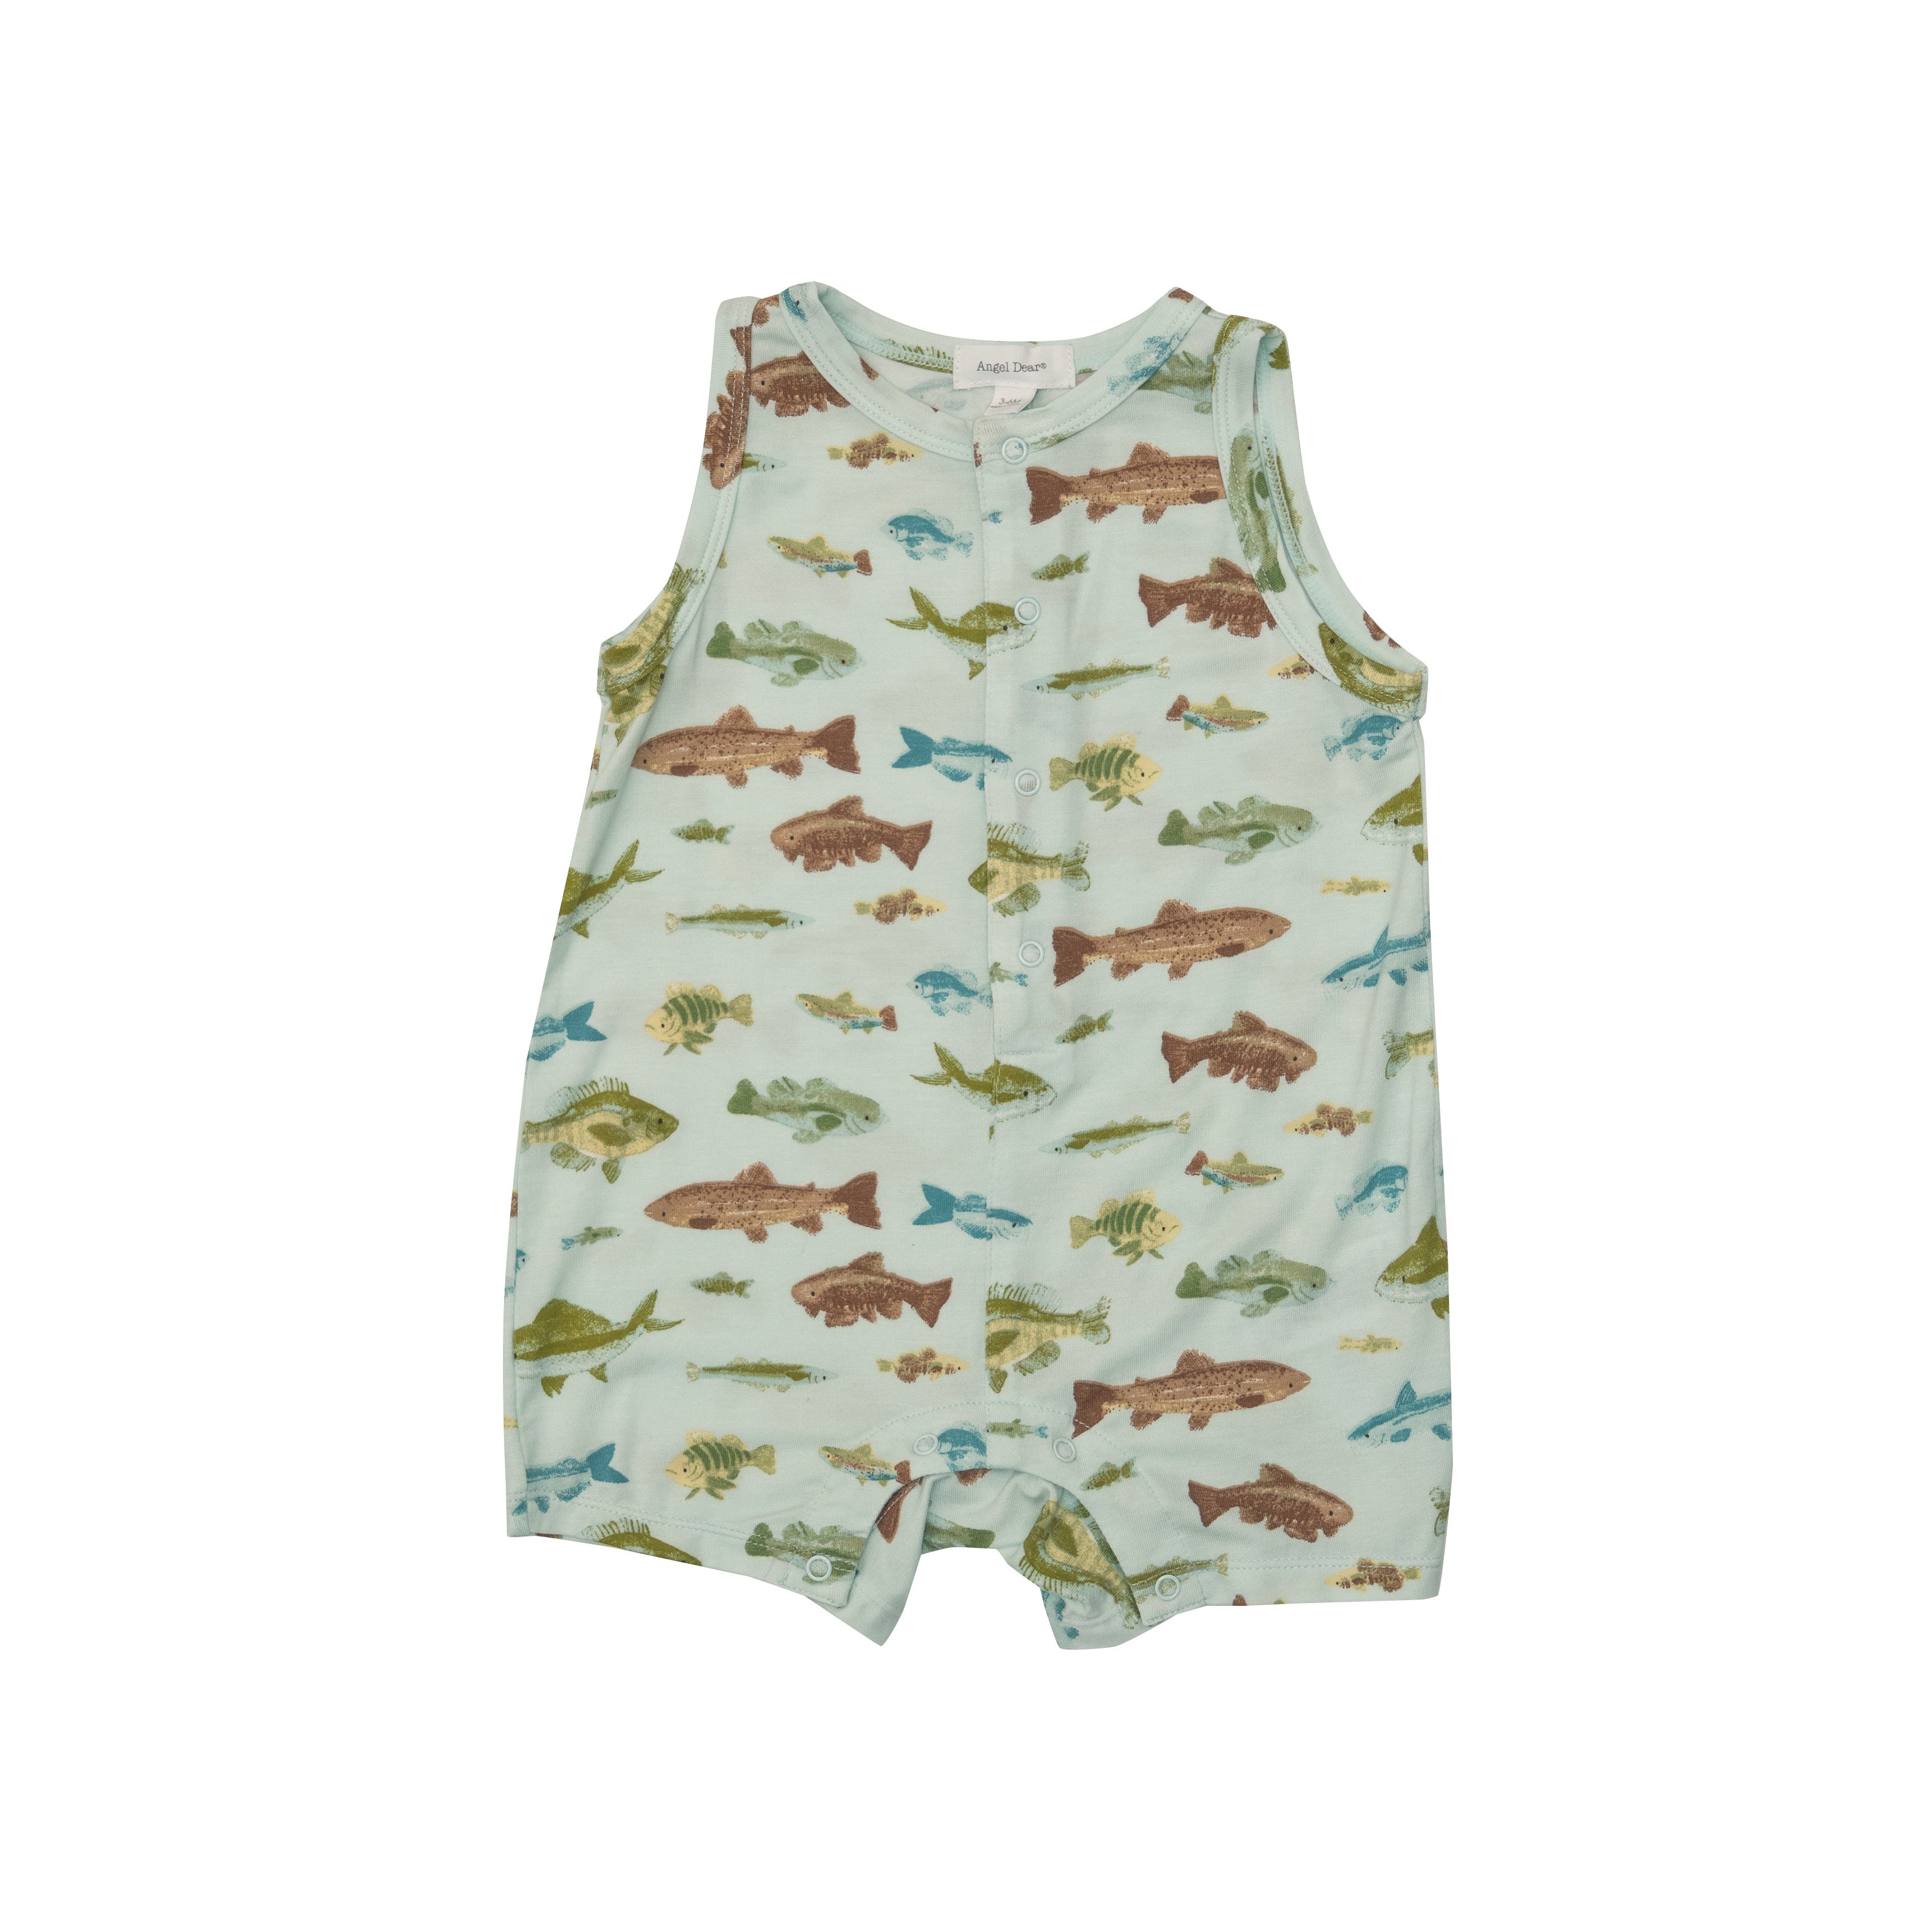 Angel Dear Bamboo Shortie Romper - Freshwater Fish  Let Them Be Little, A  Baby & Children's Clothing Boutique